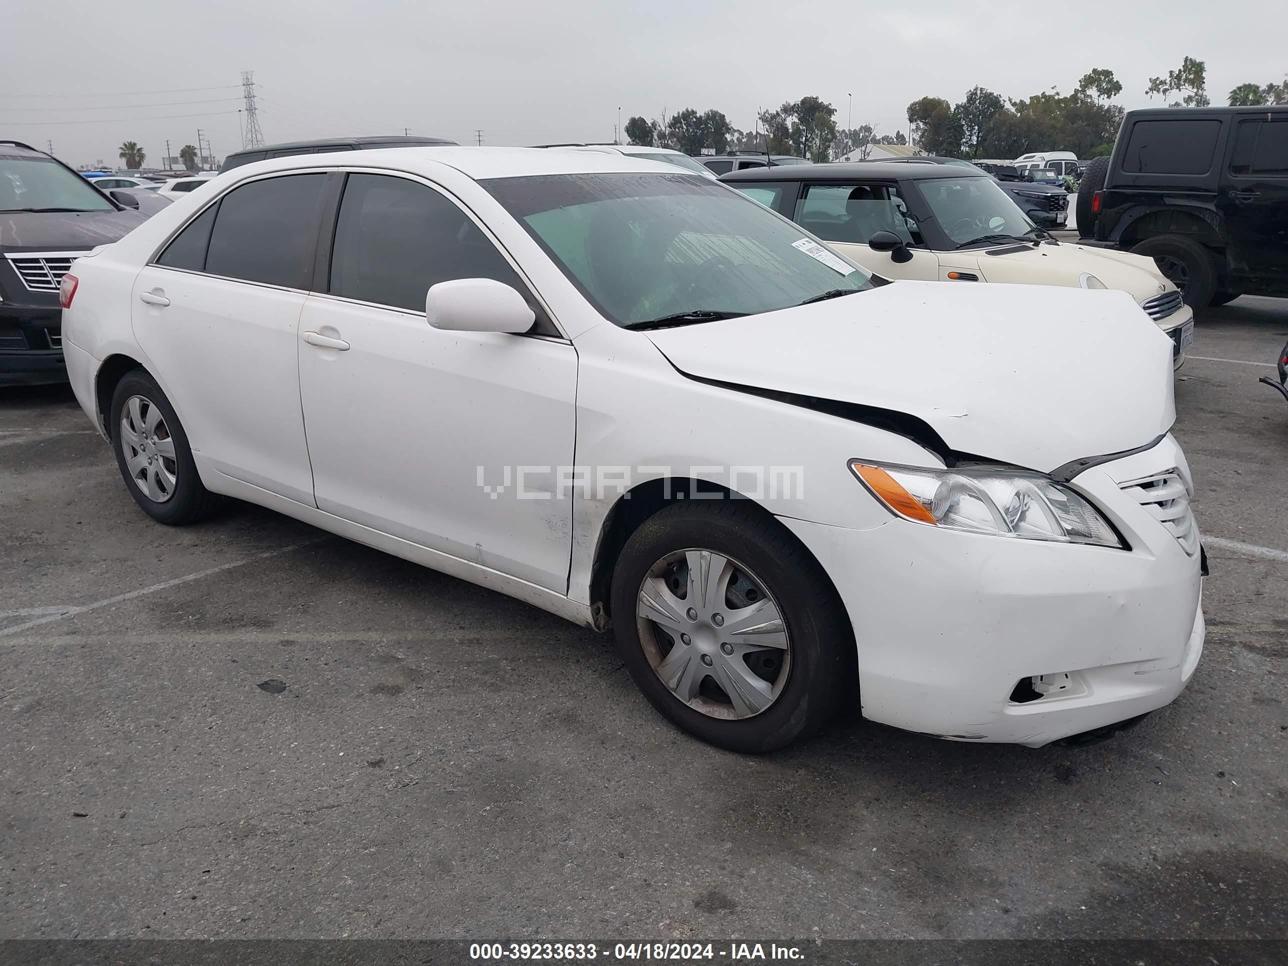 VIN: 4T4BE46K39R051123 - toyota camry